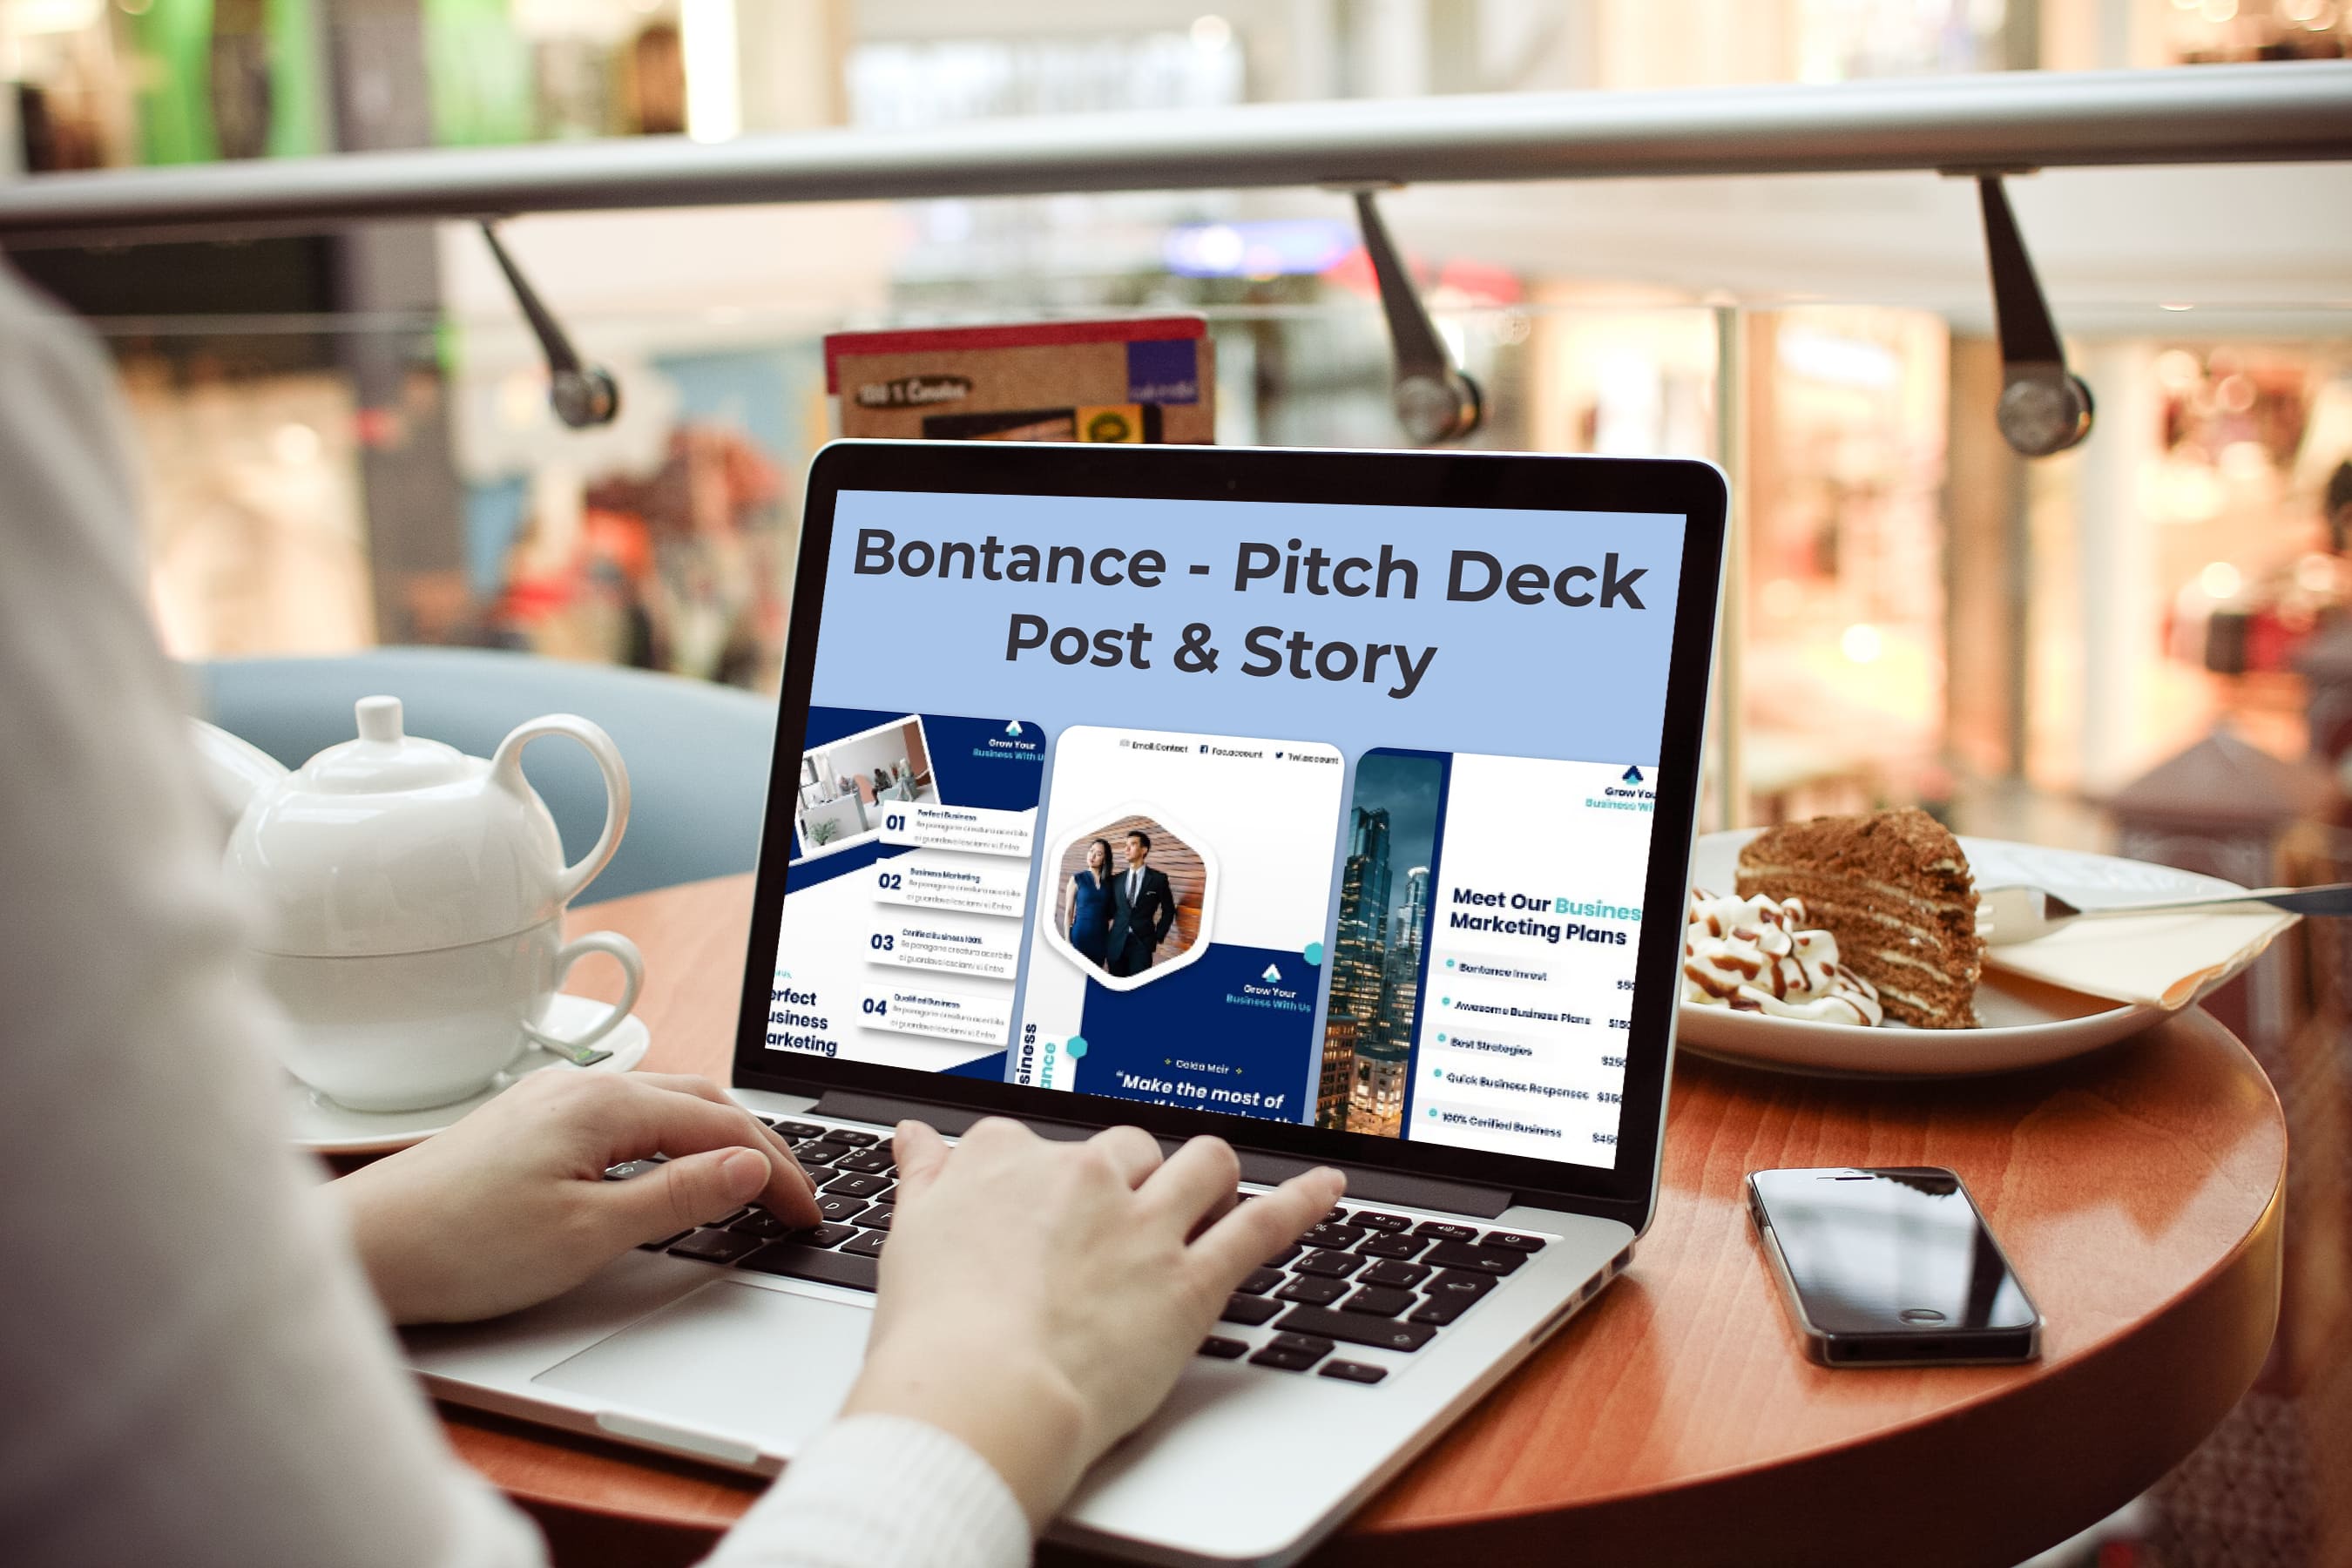 Laptop option of the Bontance - Pitch Deck Post & Story.